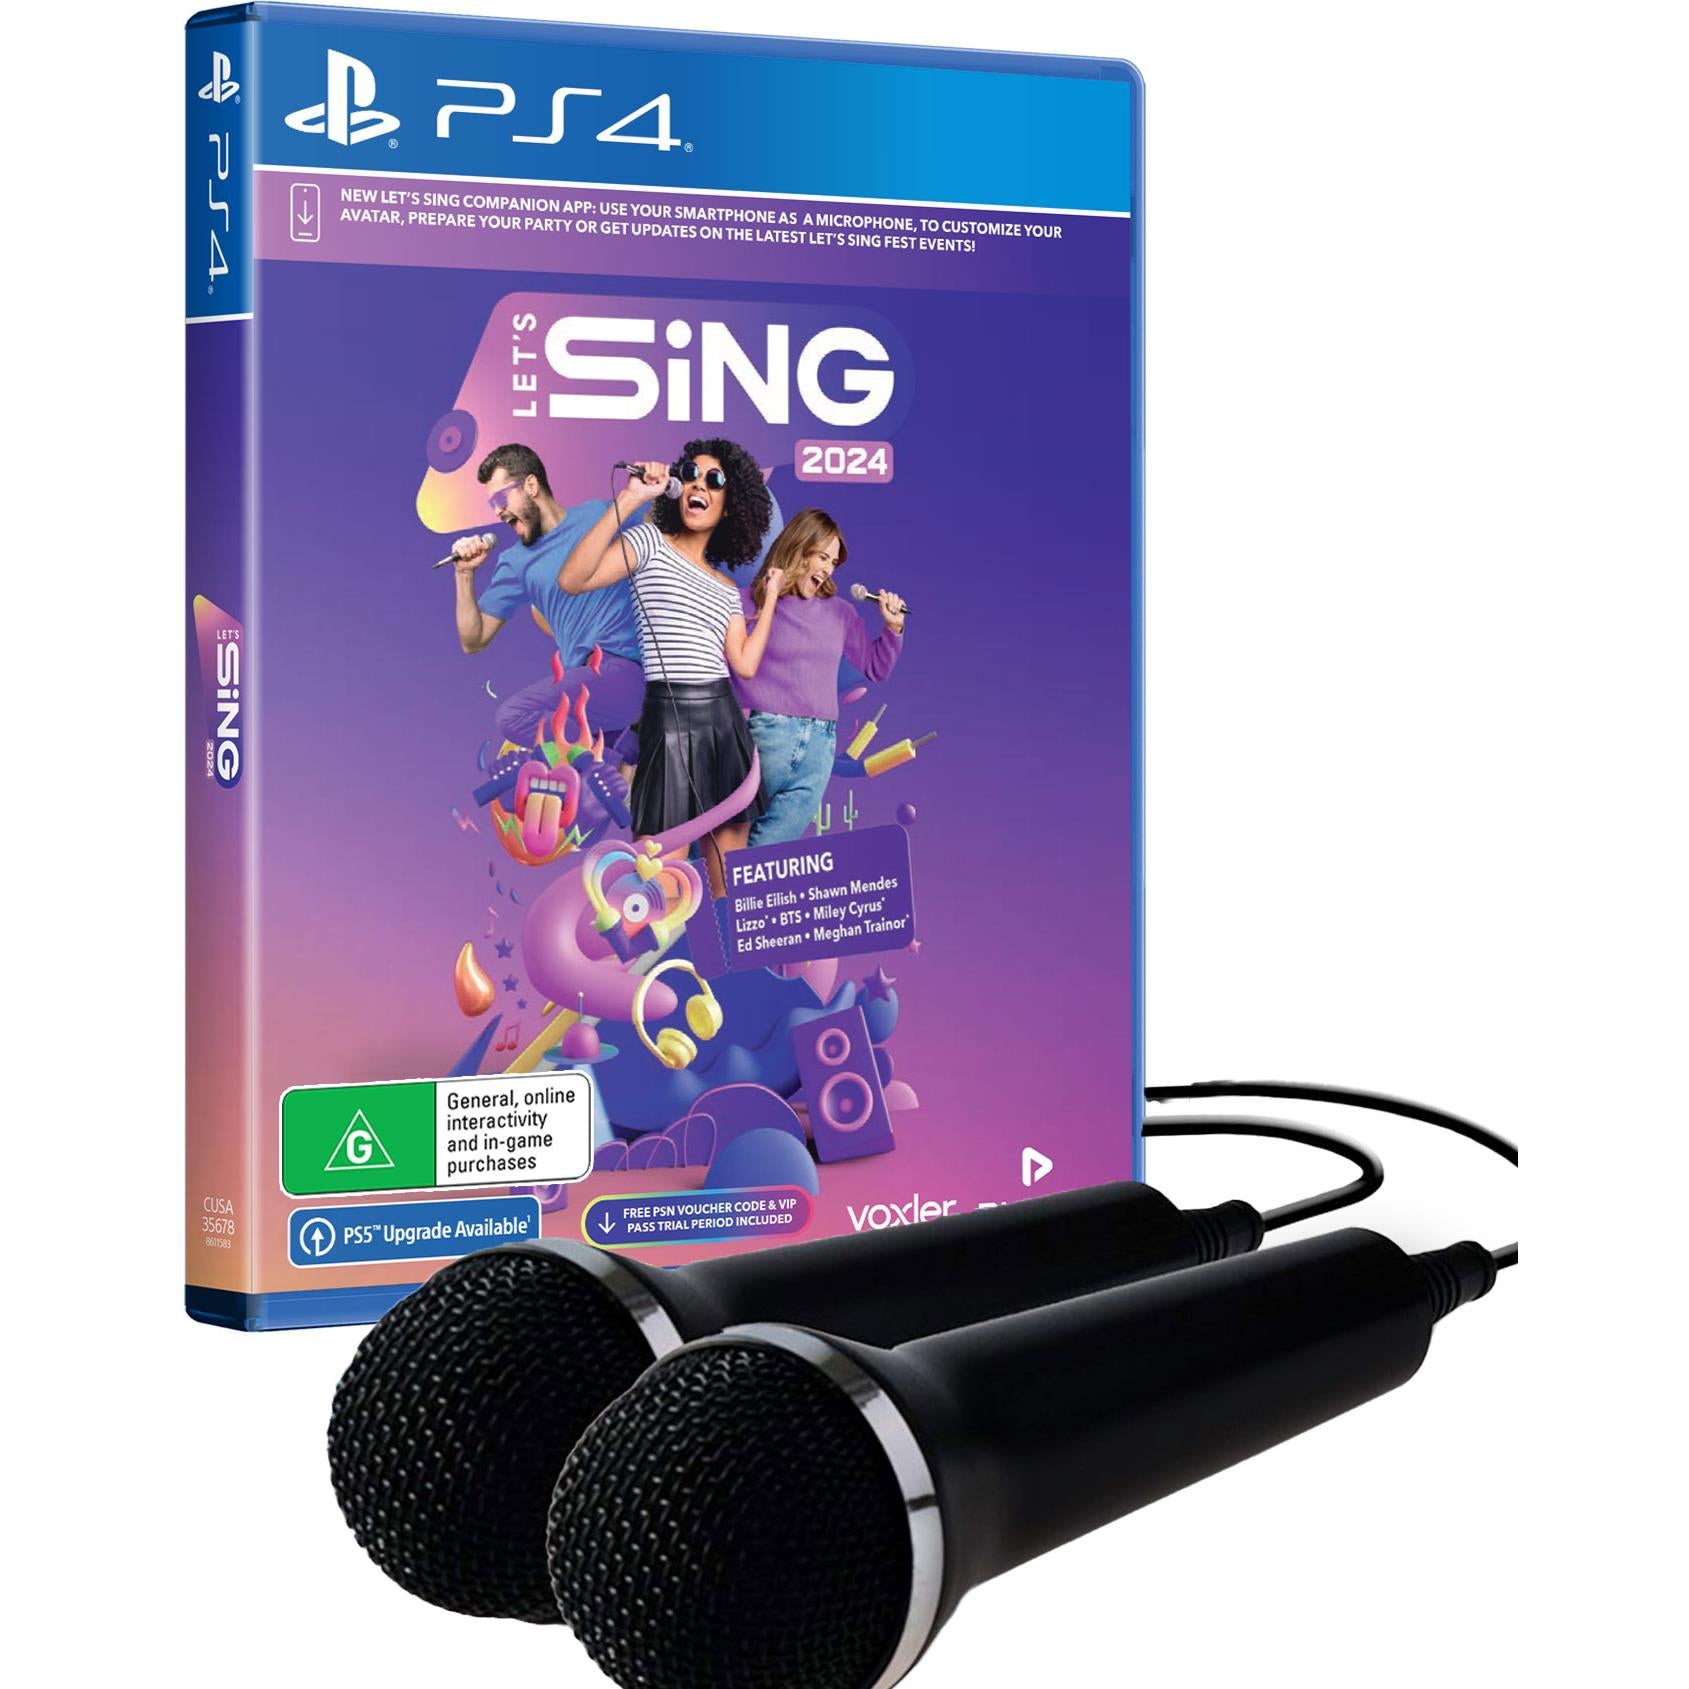 Let's Sing 2020 Review (Switch)